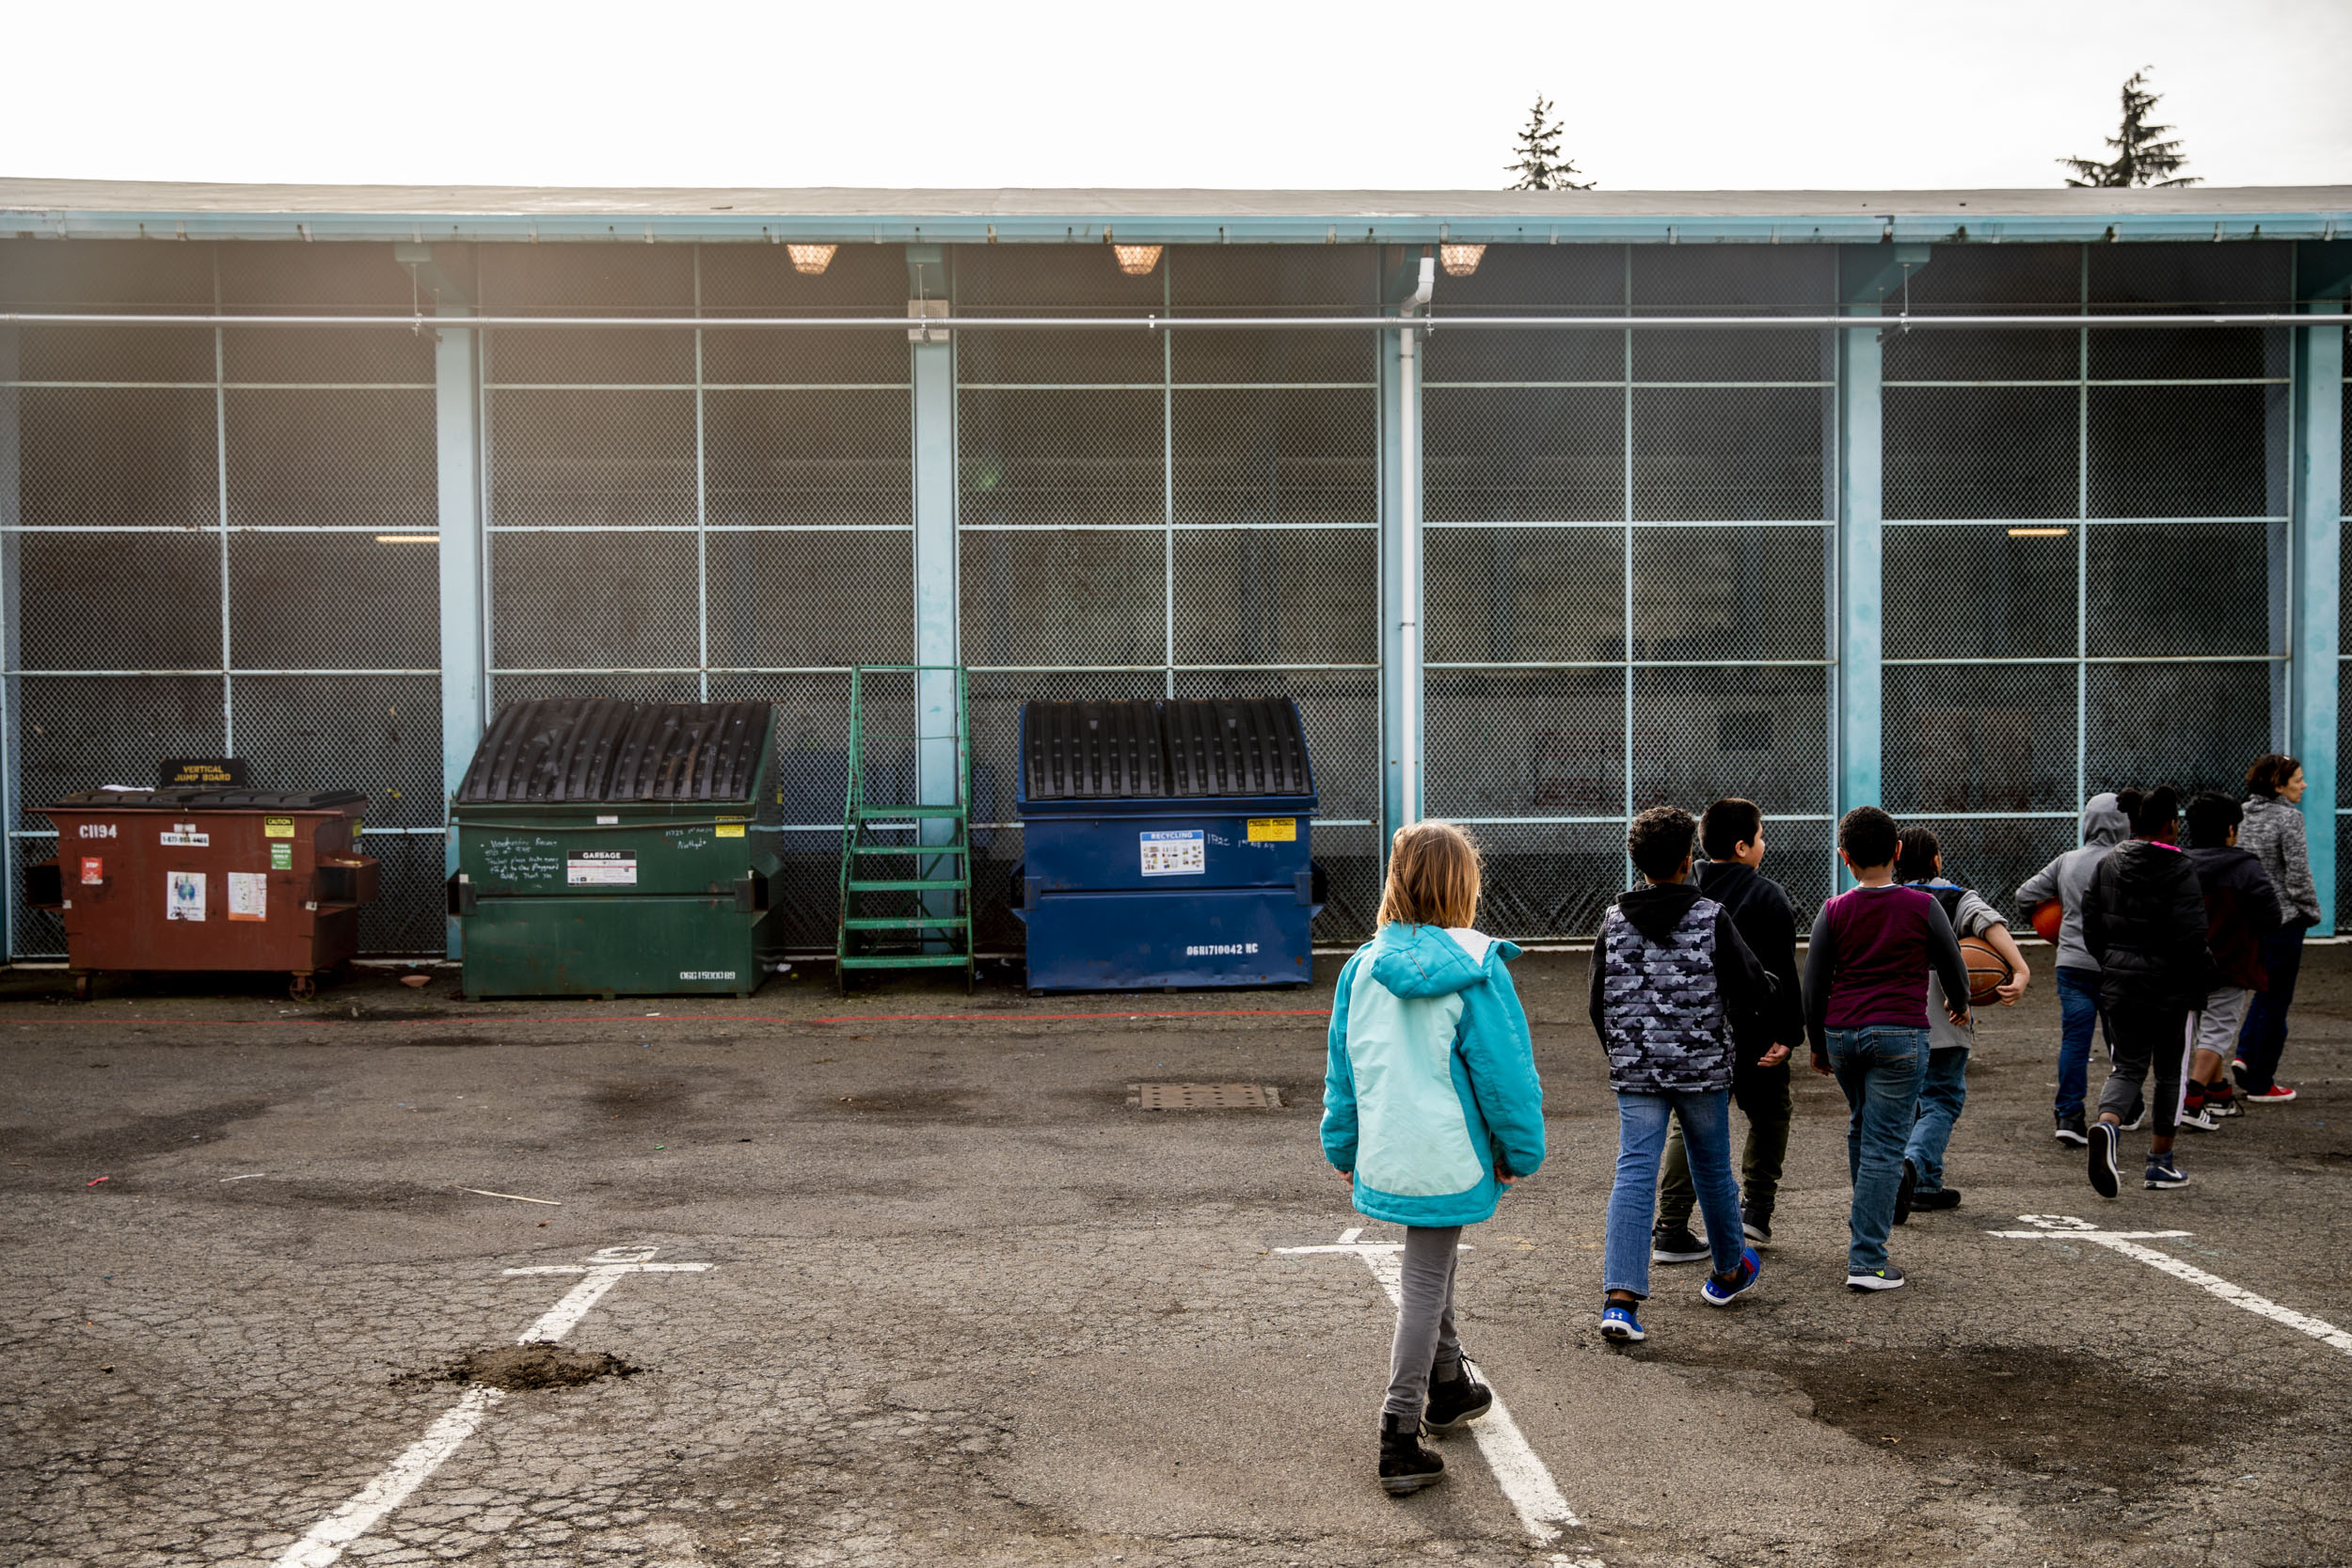 Students line up on the playground at the end of recess at Northgate Elementary School on , Jan. 31, 2018. Lack of space has forced students to share their concrete playground with Dumpsters.